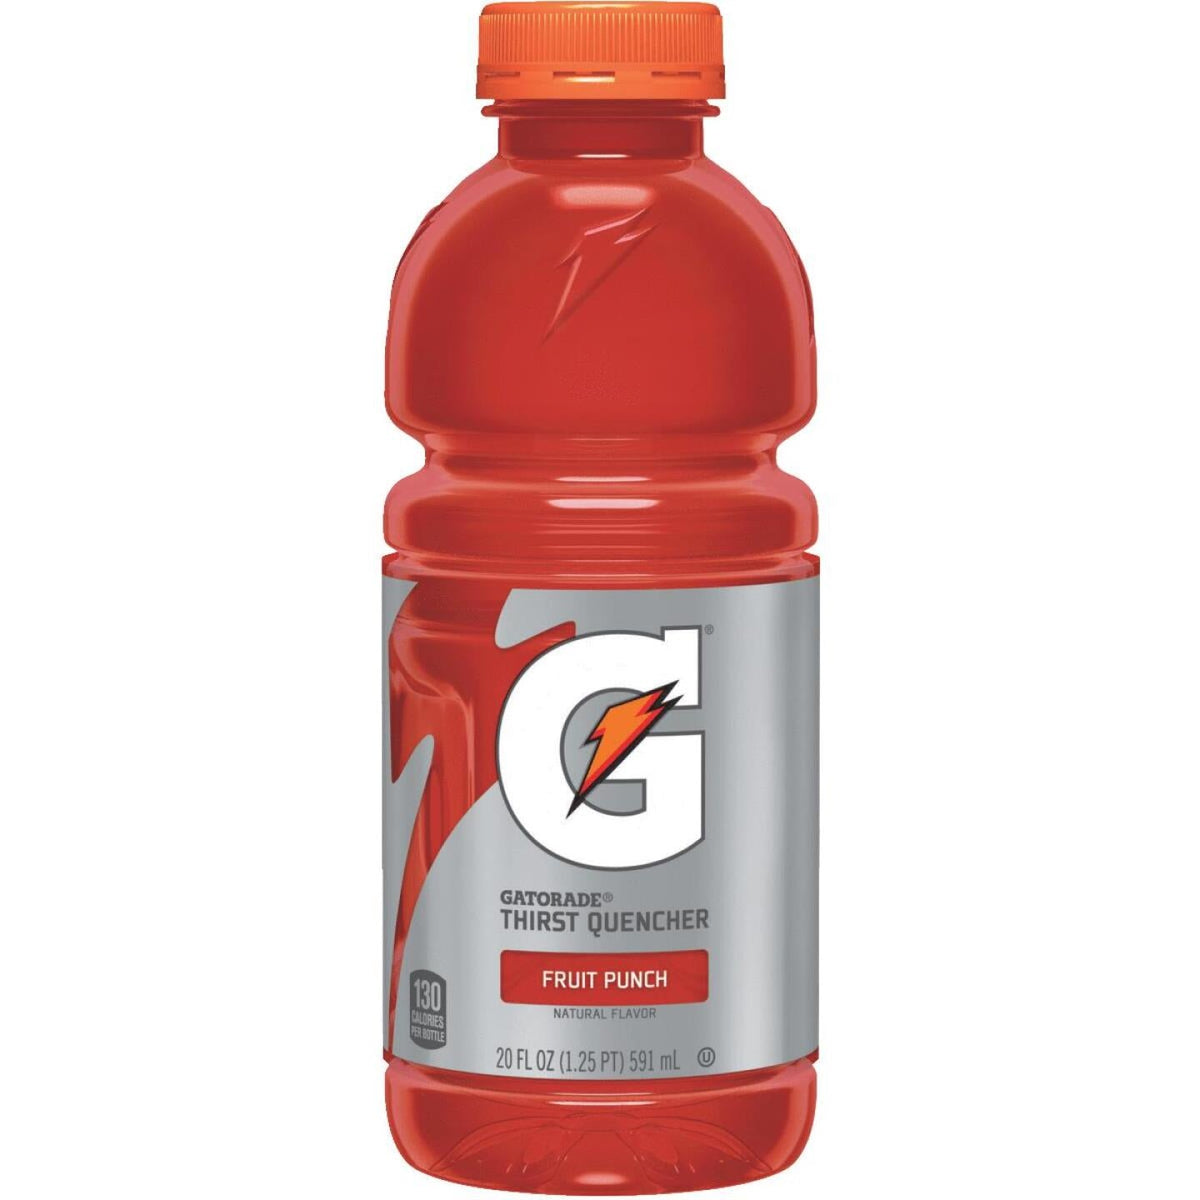 Gatorade 20 Oz. Fruit Punch Wide Mouth Thirst Quencher Drink (24-Pack) -  Deer Park, NY - The Barn Pet Feed & Supplies